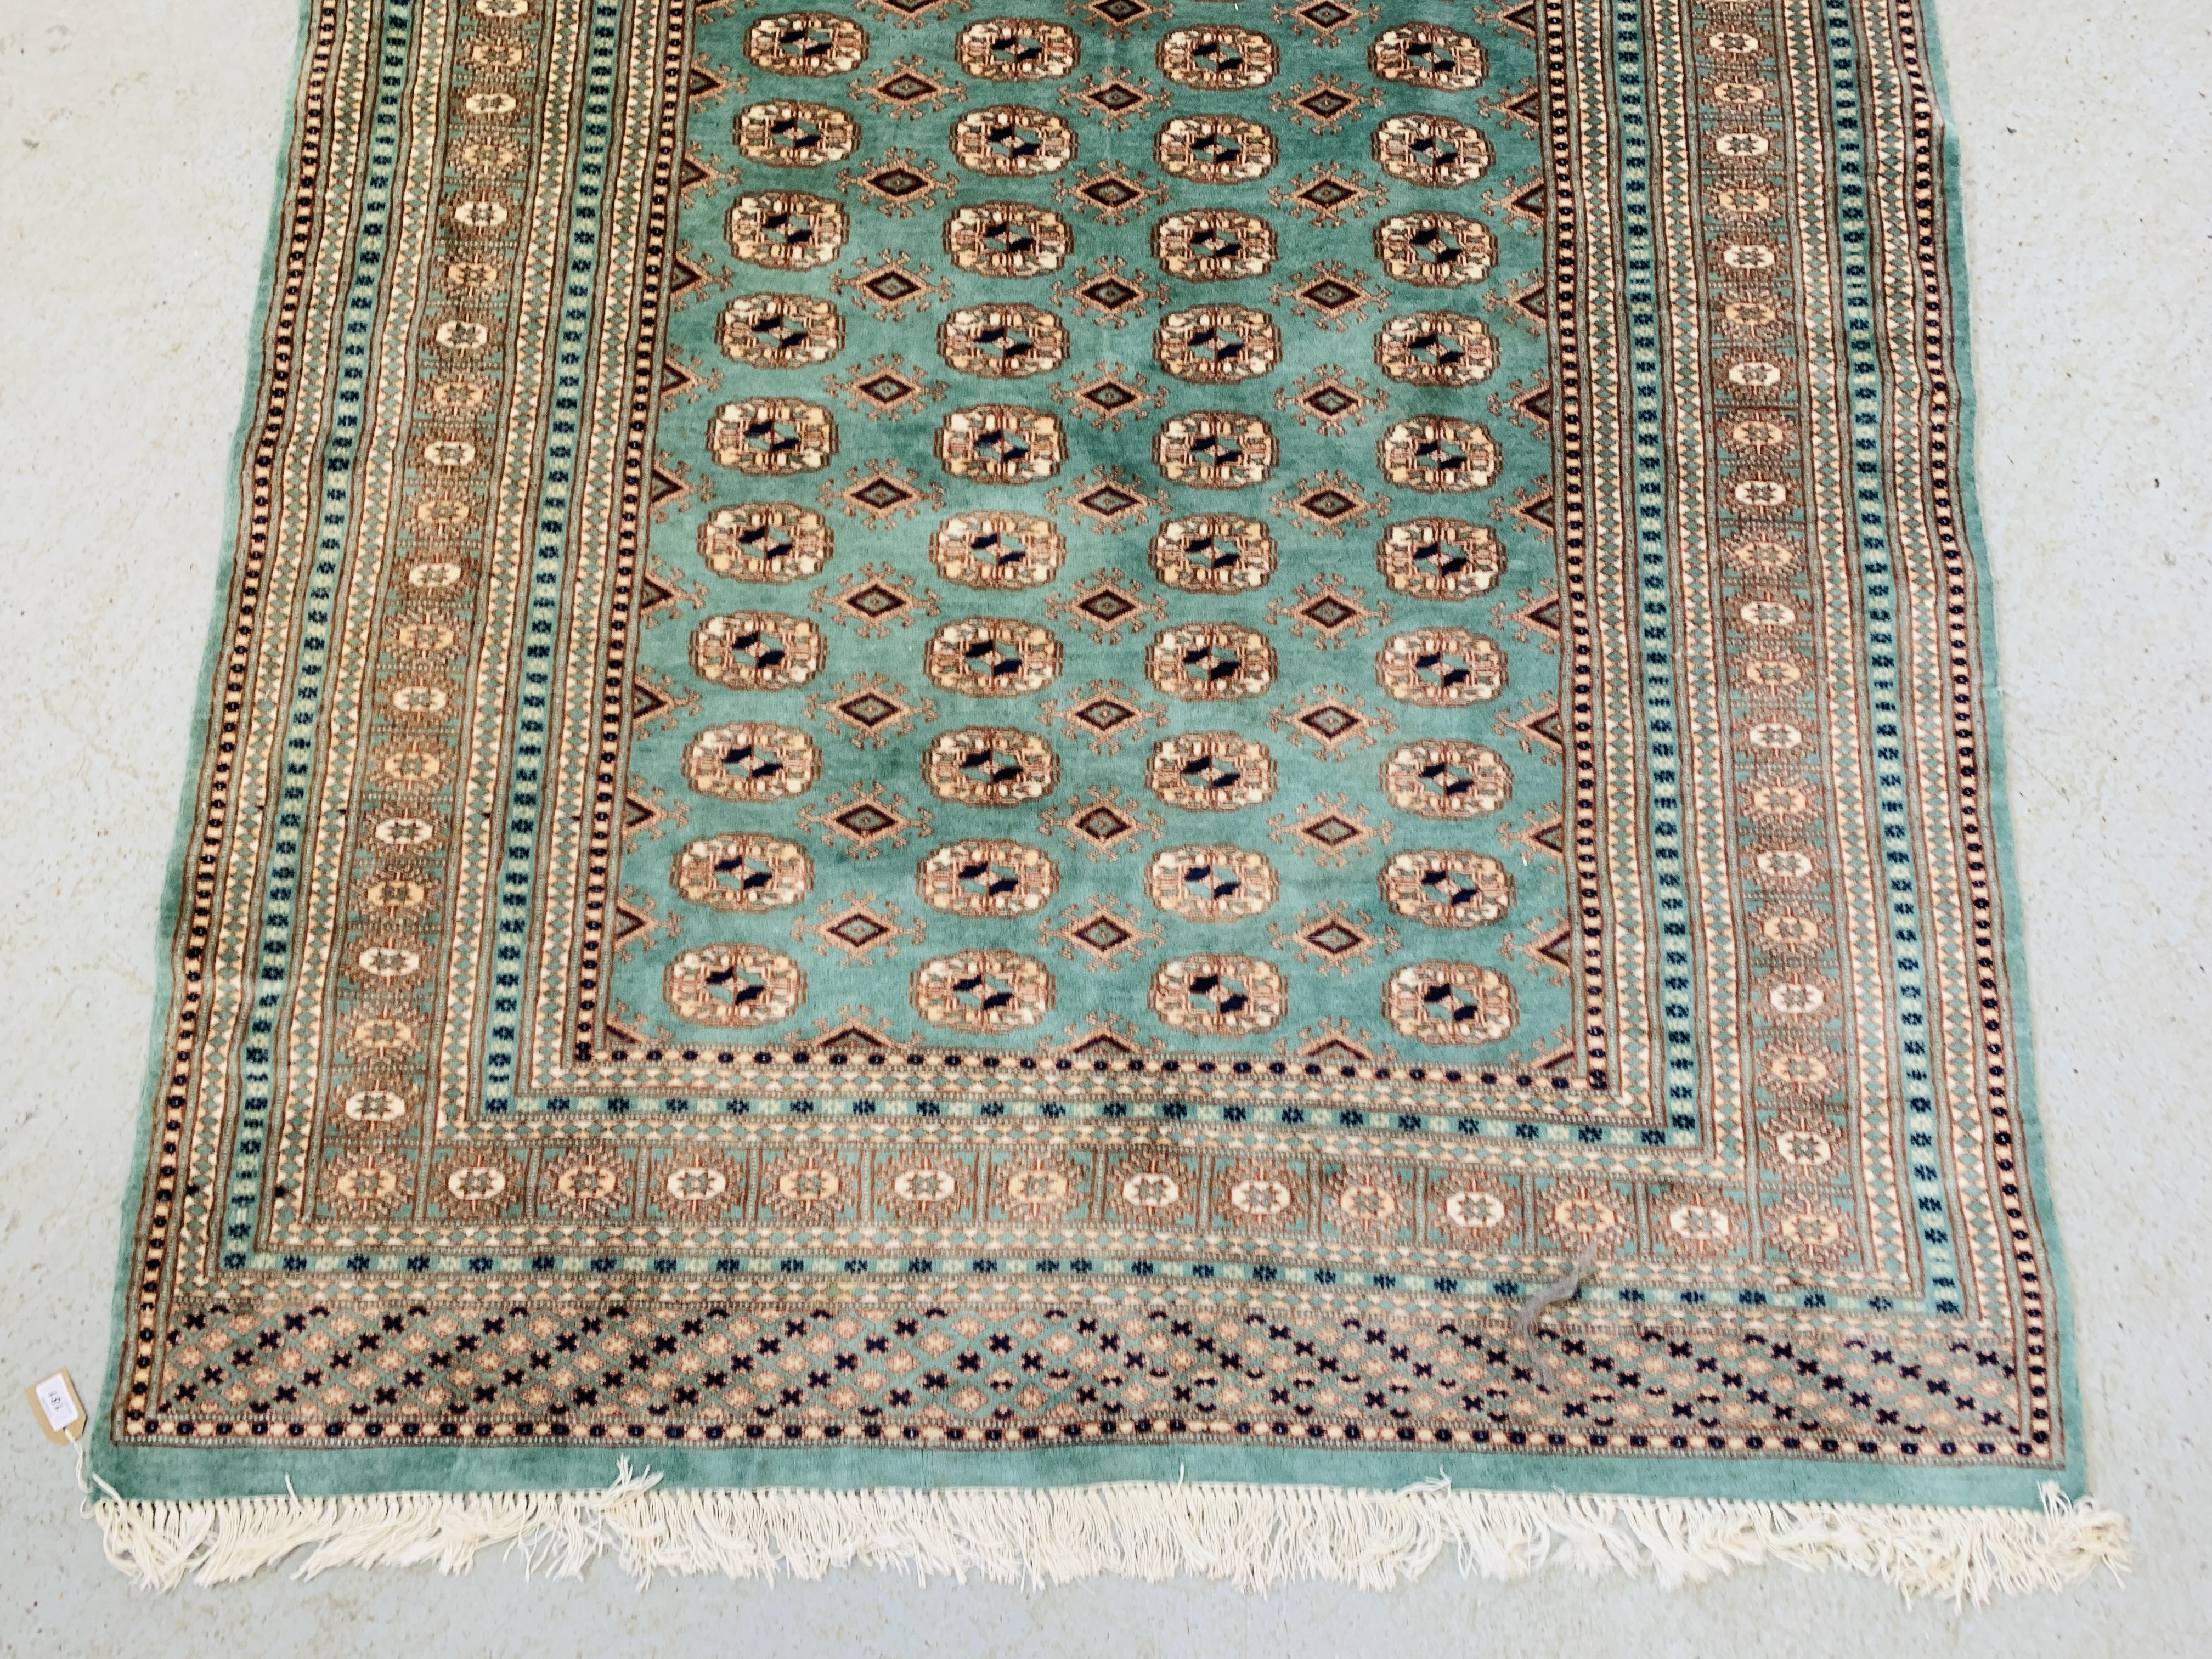 A MODERN TURKOMAN STYLE RUG, THE GULLS ON A PALE GREEN FIELD - 247 X 158CM. - Image 3 of 7